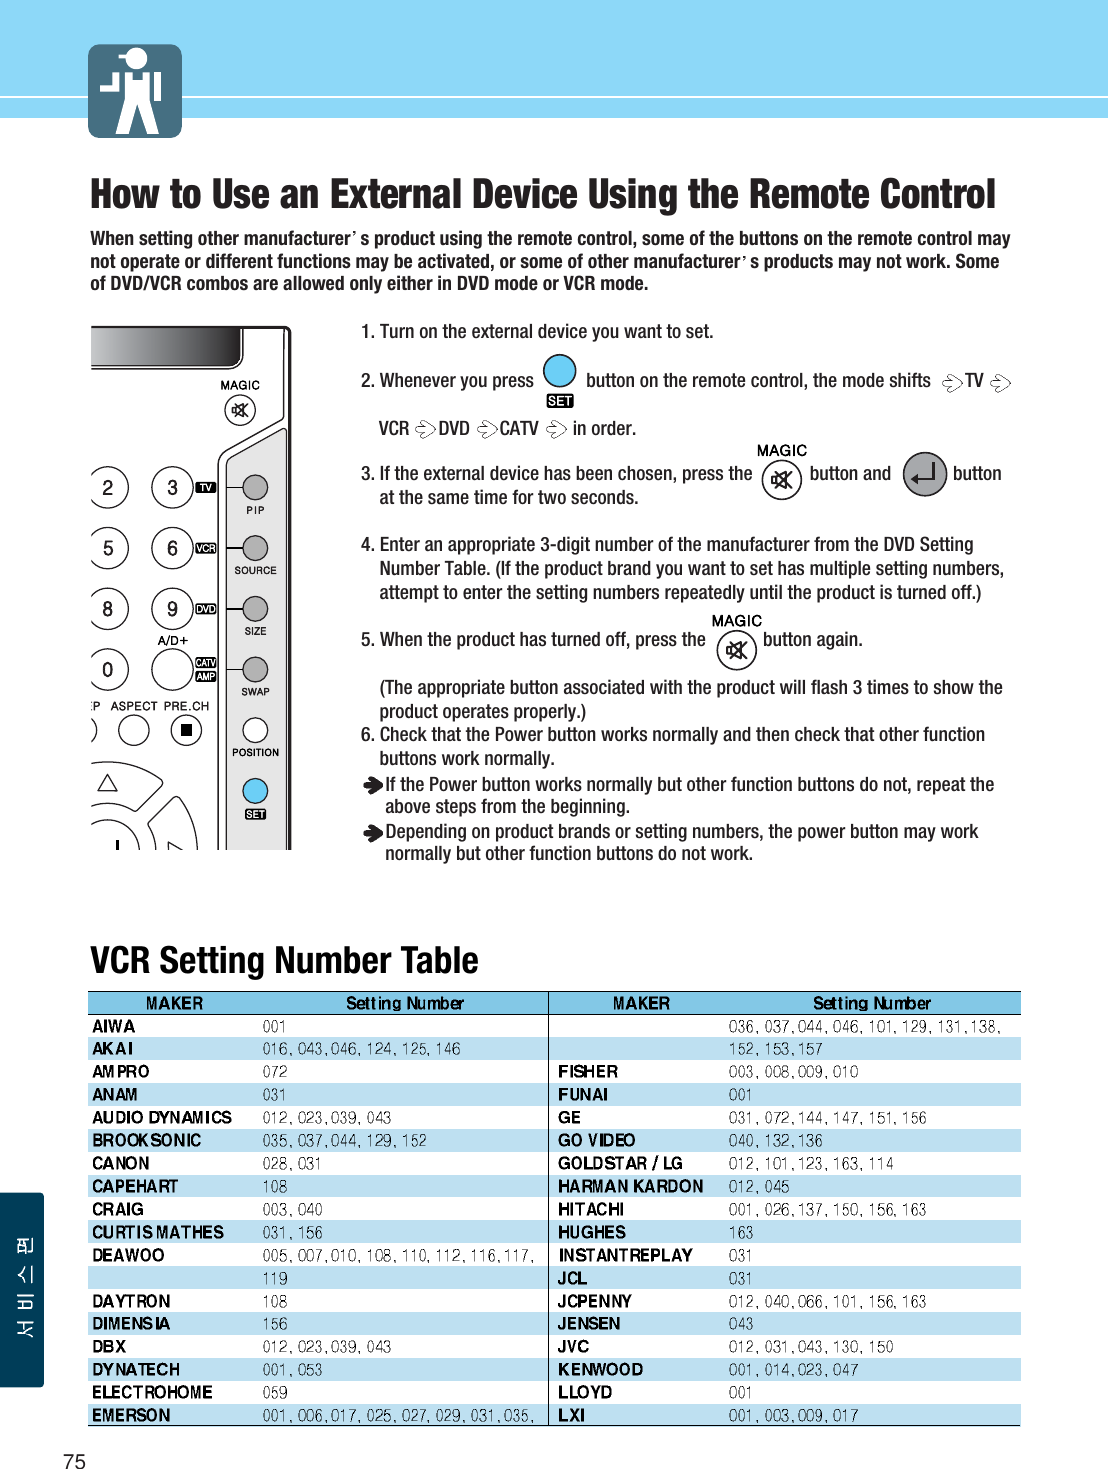 75How to Use an External Device Using the Remote ControlWhen setting other manufacturer s product using the remote control, some of the buttons on the remote control maynot operate or different functions may be activated, or some of other manufacturer s products may not work. Someof DVD/VCR combos are allowed only either in DVD mode or VCR mode. 1. Turn on the external device you want to set. 2. Whenever you press           button on the remote control, the mode shifts   TVVCR DVD CATV in order.3. If the external device has been chosen, press the            button and             buttonat the same time for two seconds.4. Enter an appropriate 3-digit number of the manufacturer from the DVD SettingNumber Table. (If the product brand you want to set has multiple setting numbers,attempt to enter the setting numbers repeatedly until the product is turned off.)5. When the product has turned off, press the            button again. (The appropriate button associated with the product will flash 3 times to show theproduct operates properly.)6. Check that the Power button works normally and then check that other functionbuttons work normally.If the Power button works normally but other function buttons do not, repeat theabove steps from the beginning.Depending on product brands or setting numbers, the power button may worknormally but other function buttons do not work.VCR Setting Number Table